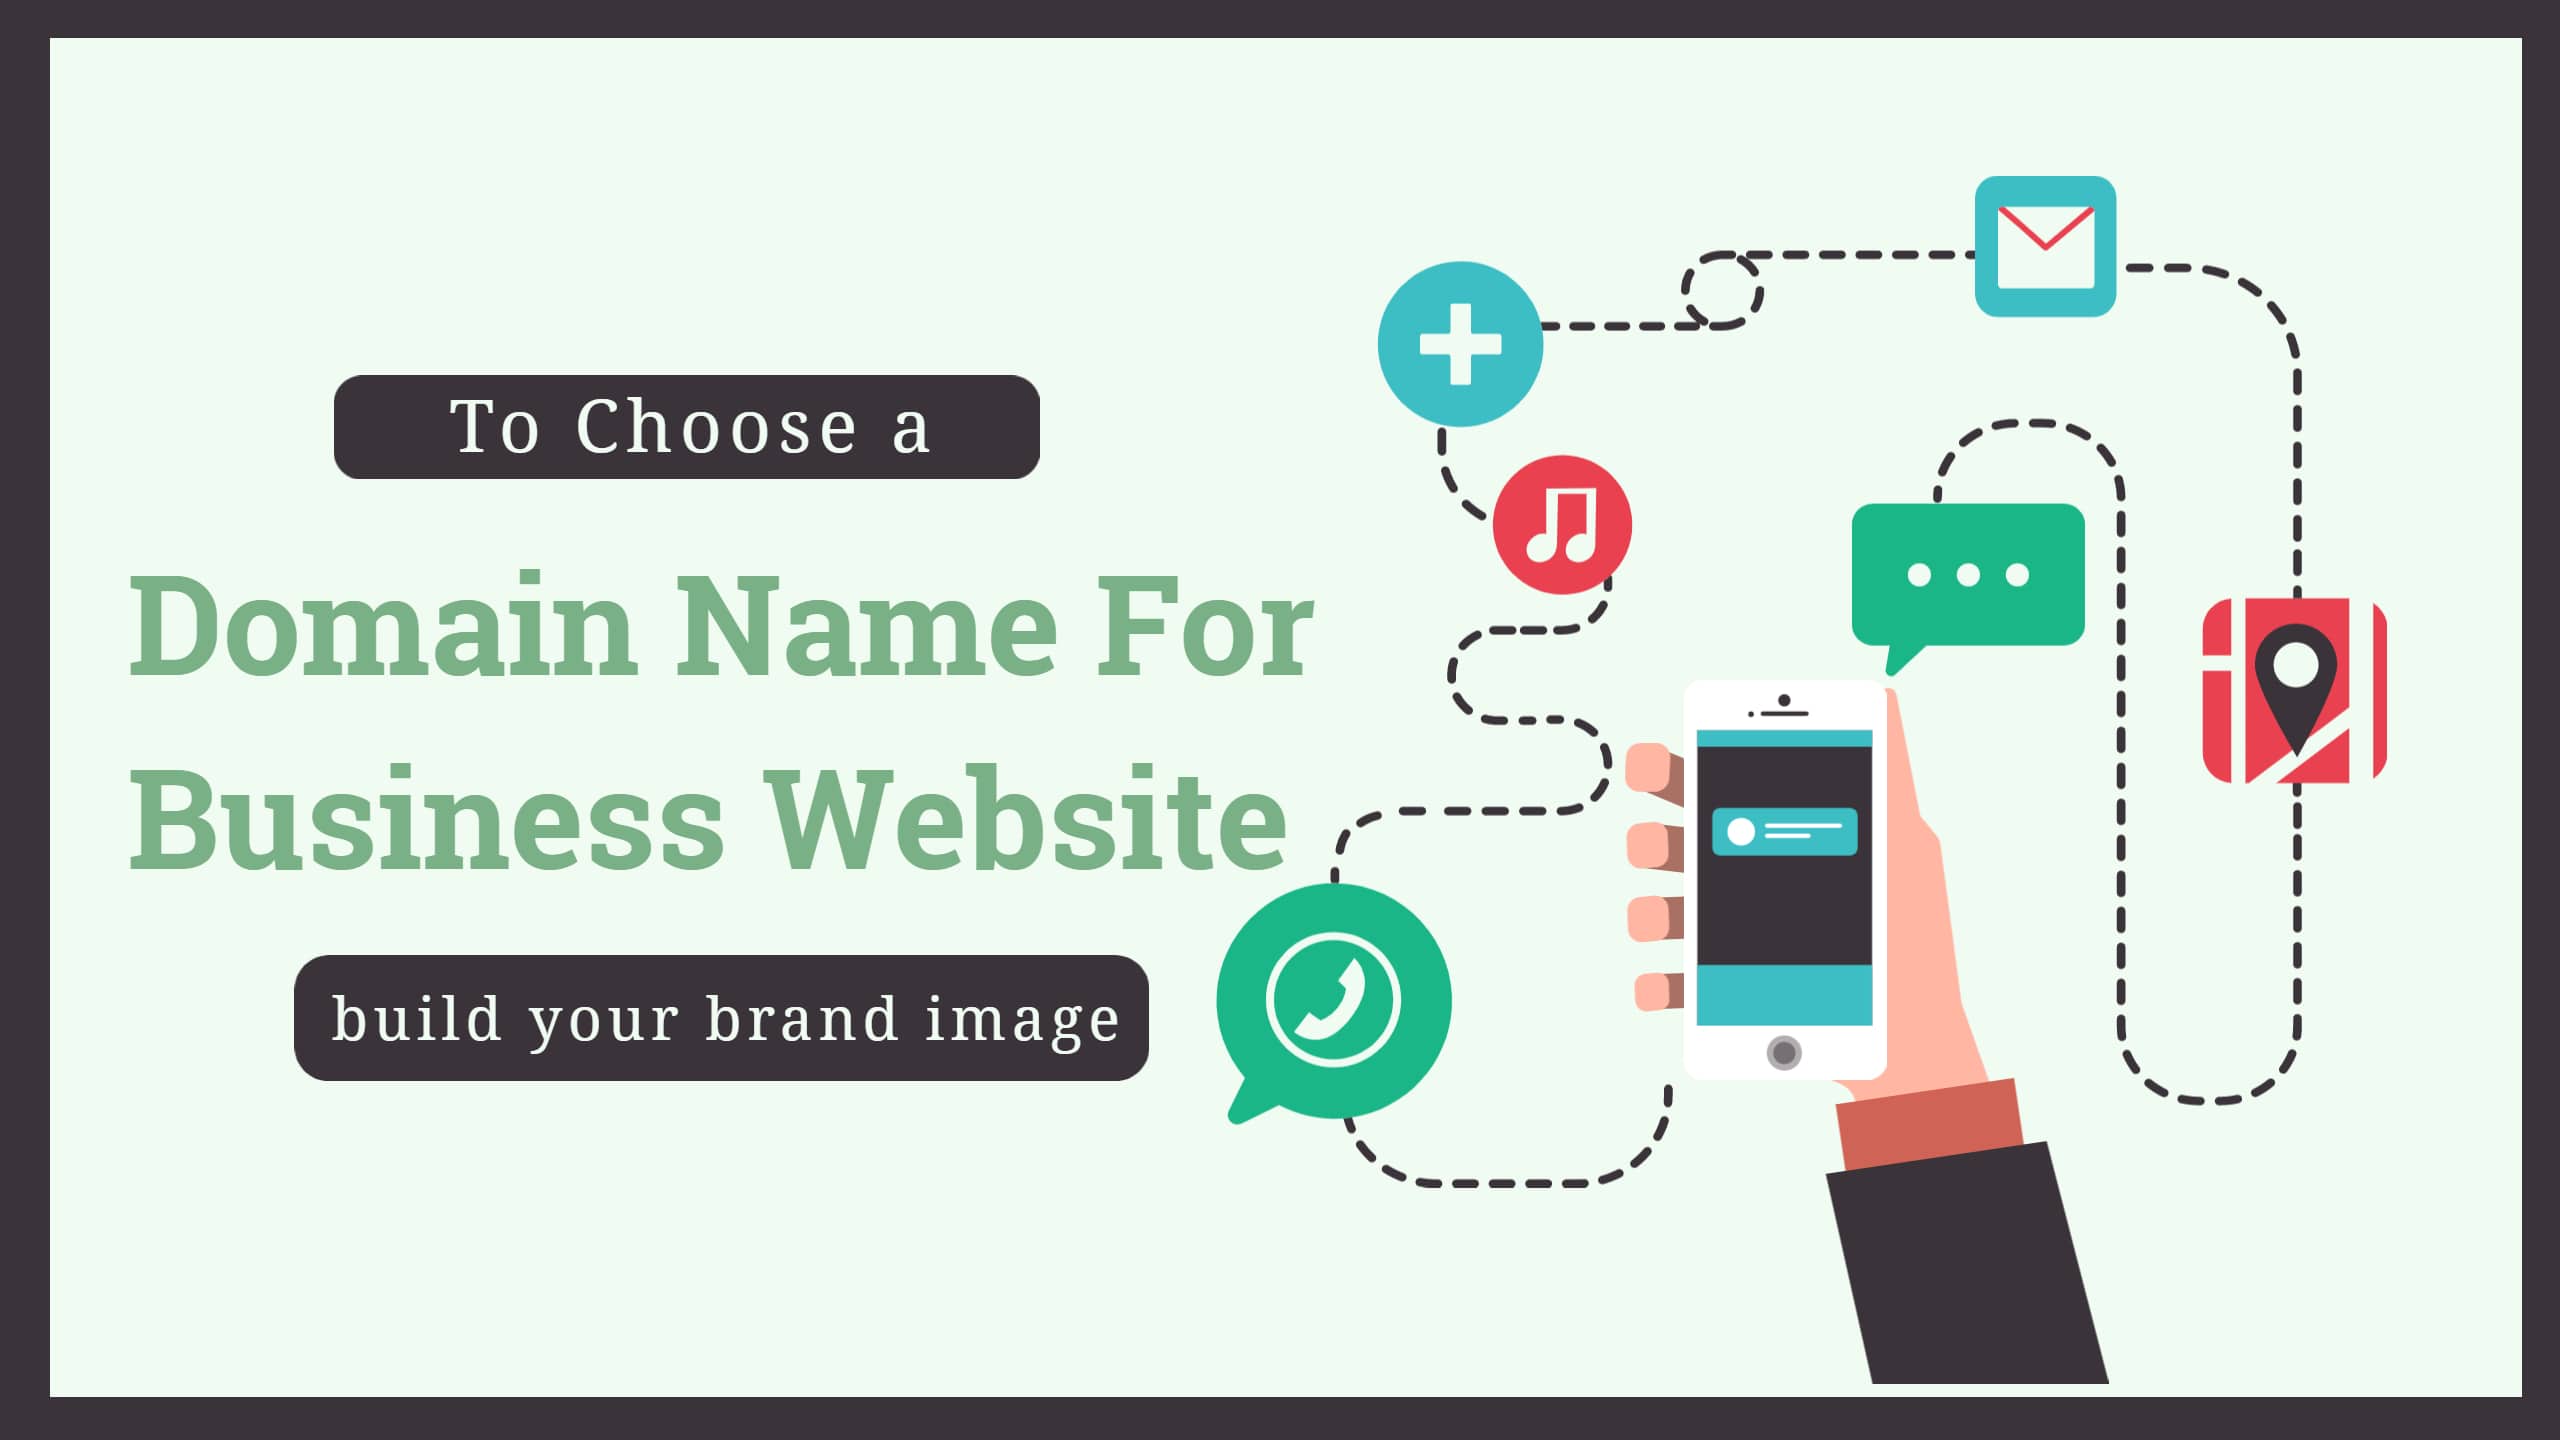 How To Choose a Domain Name For Your Business Website